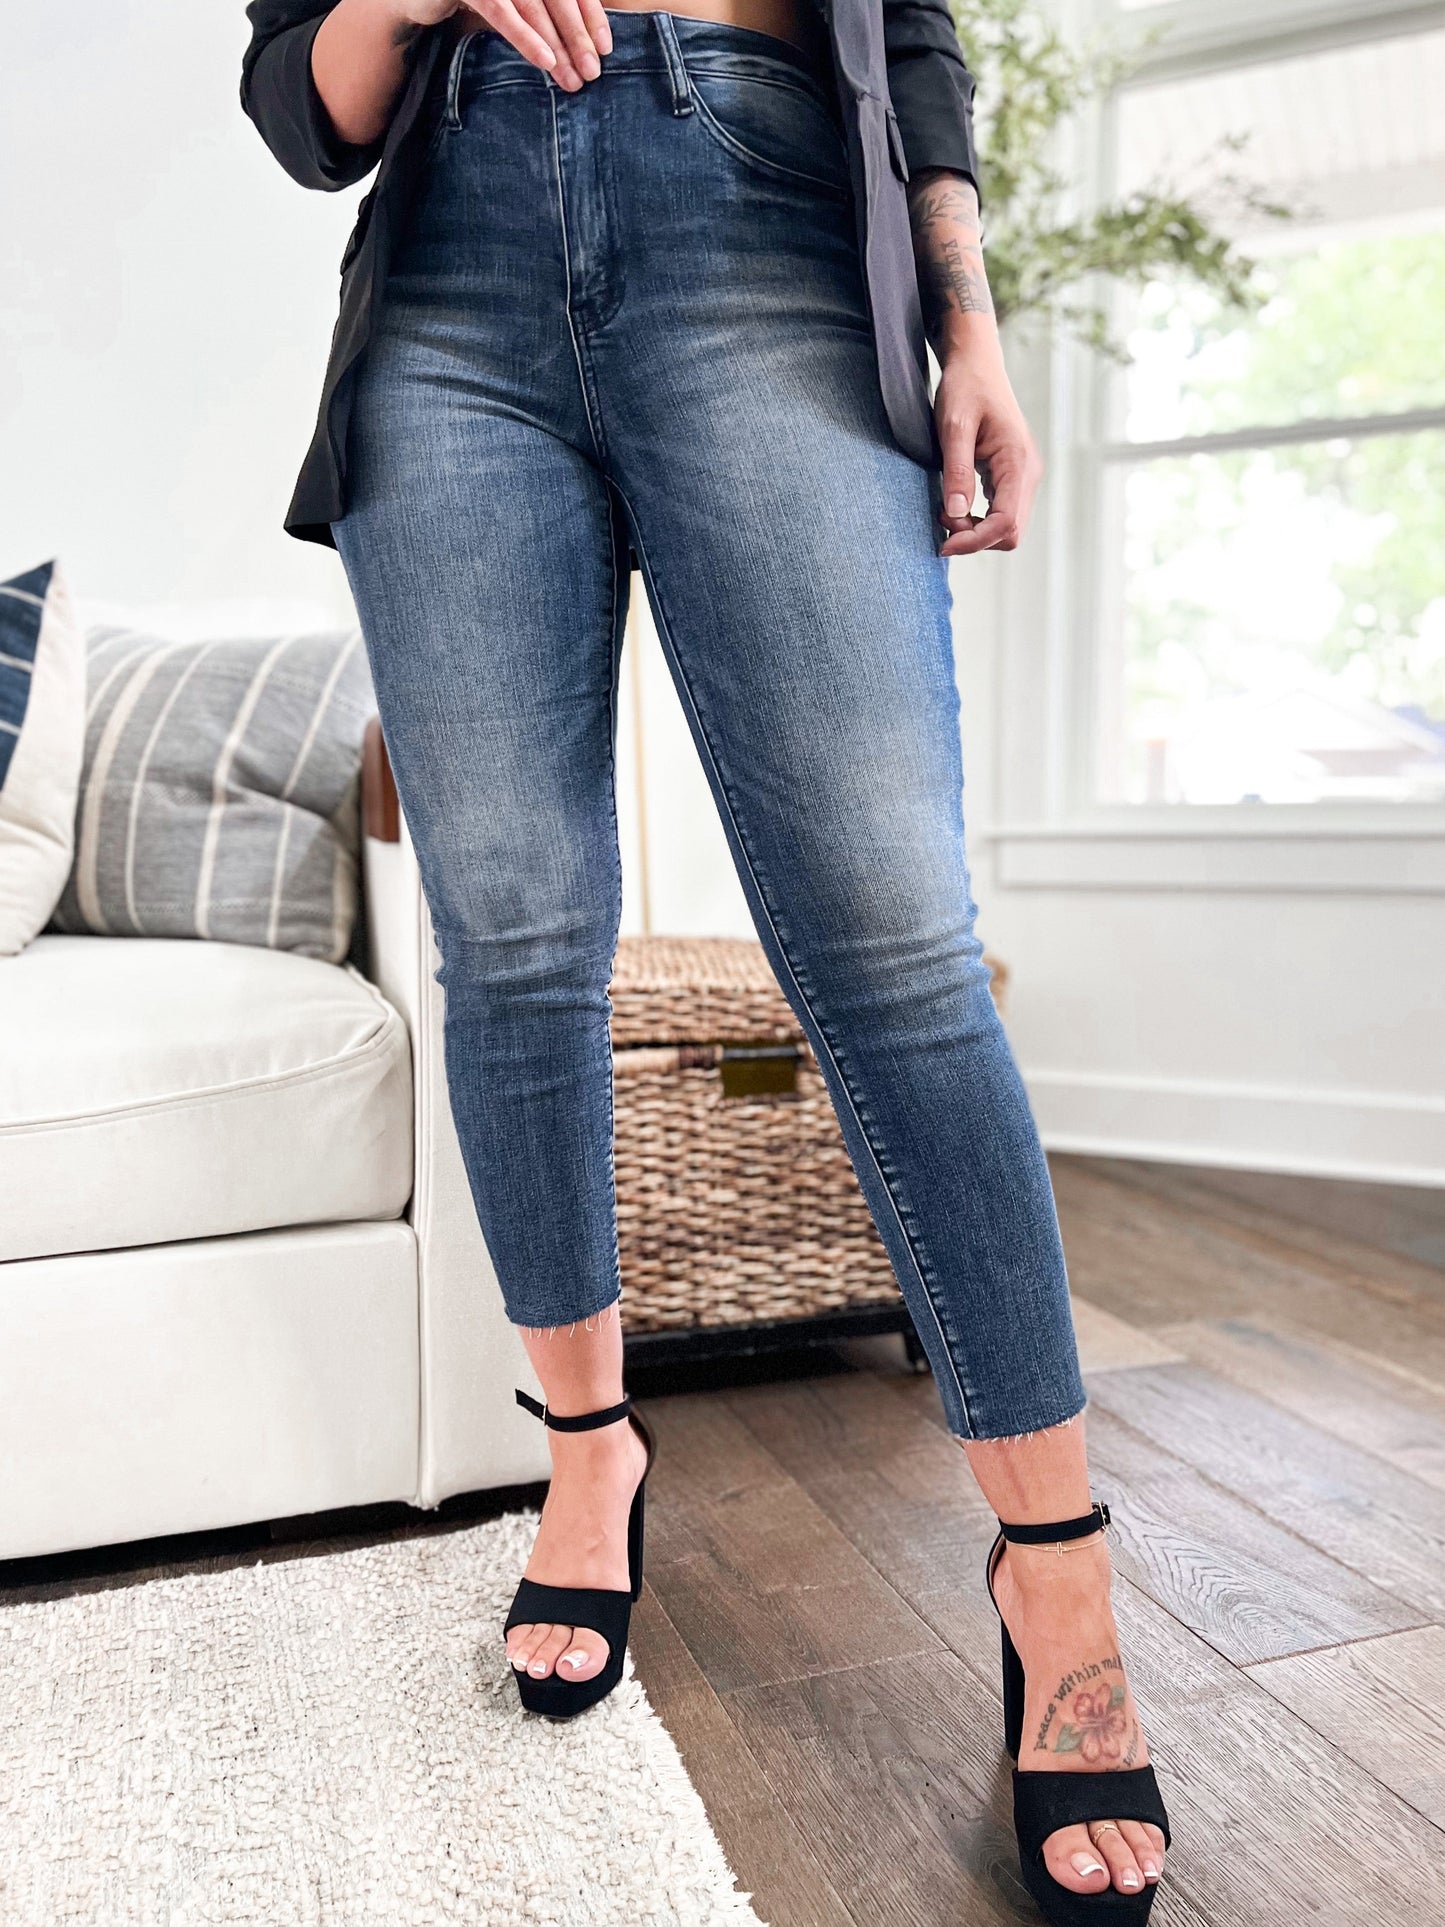 Judy Blue Material Girl Contrast Wash Relaxed Fit Jeans